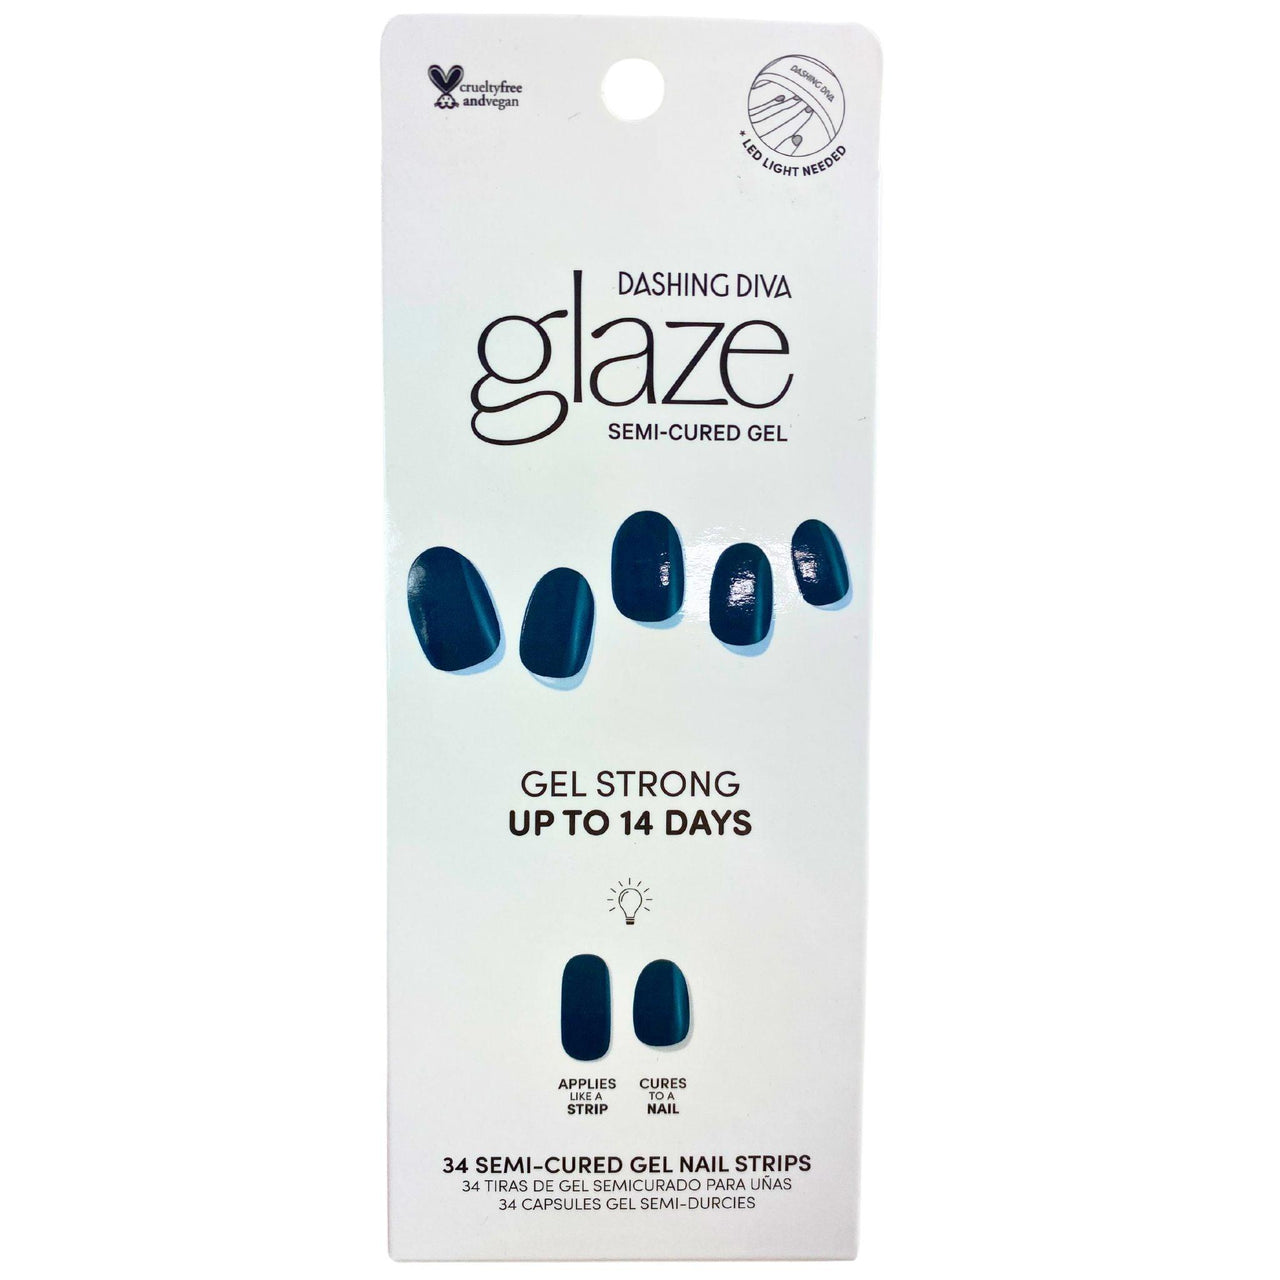 Dashing Diva Glaze Semi-Cured Gel Strong up to 14 Days Real Black (48 Pcs Lot) - Discount Wholesalers Inc